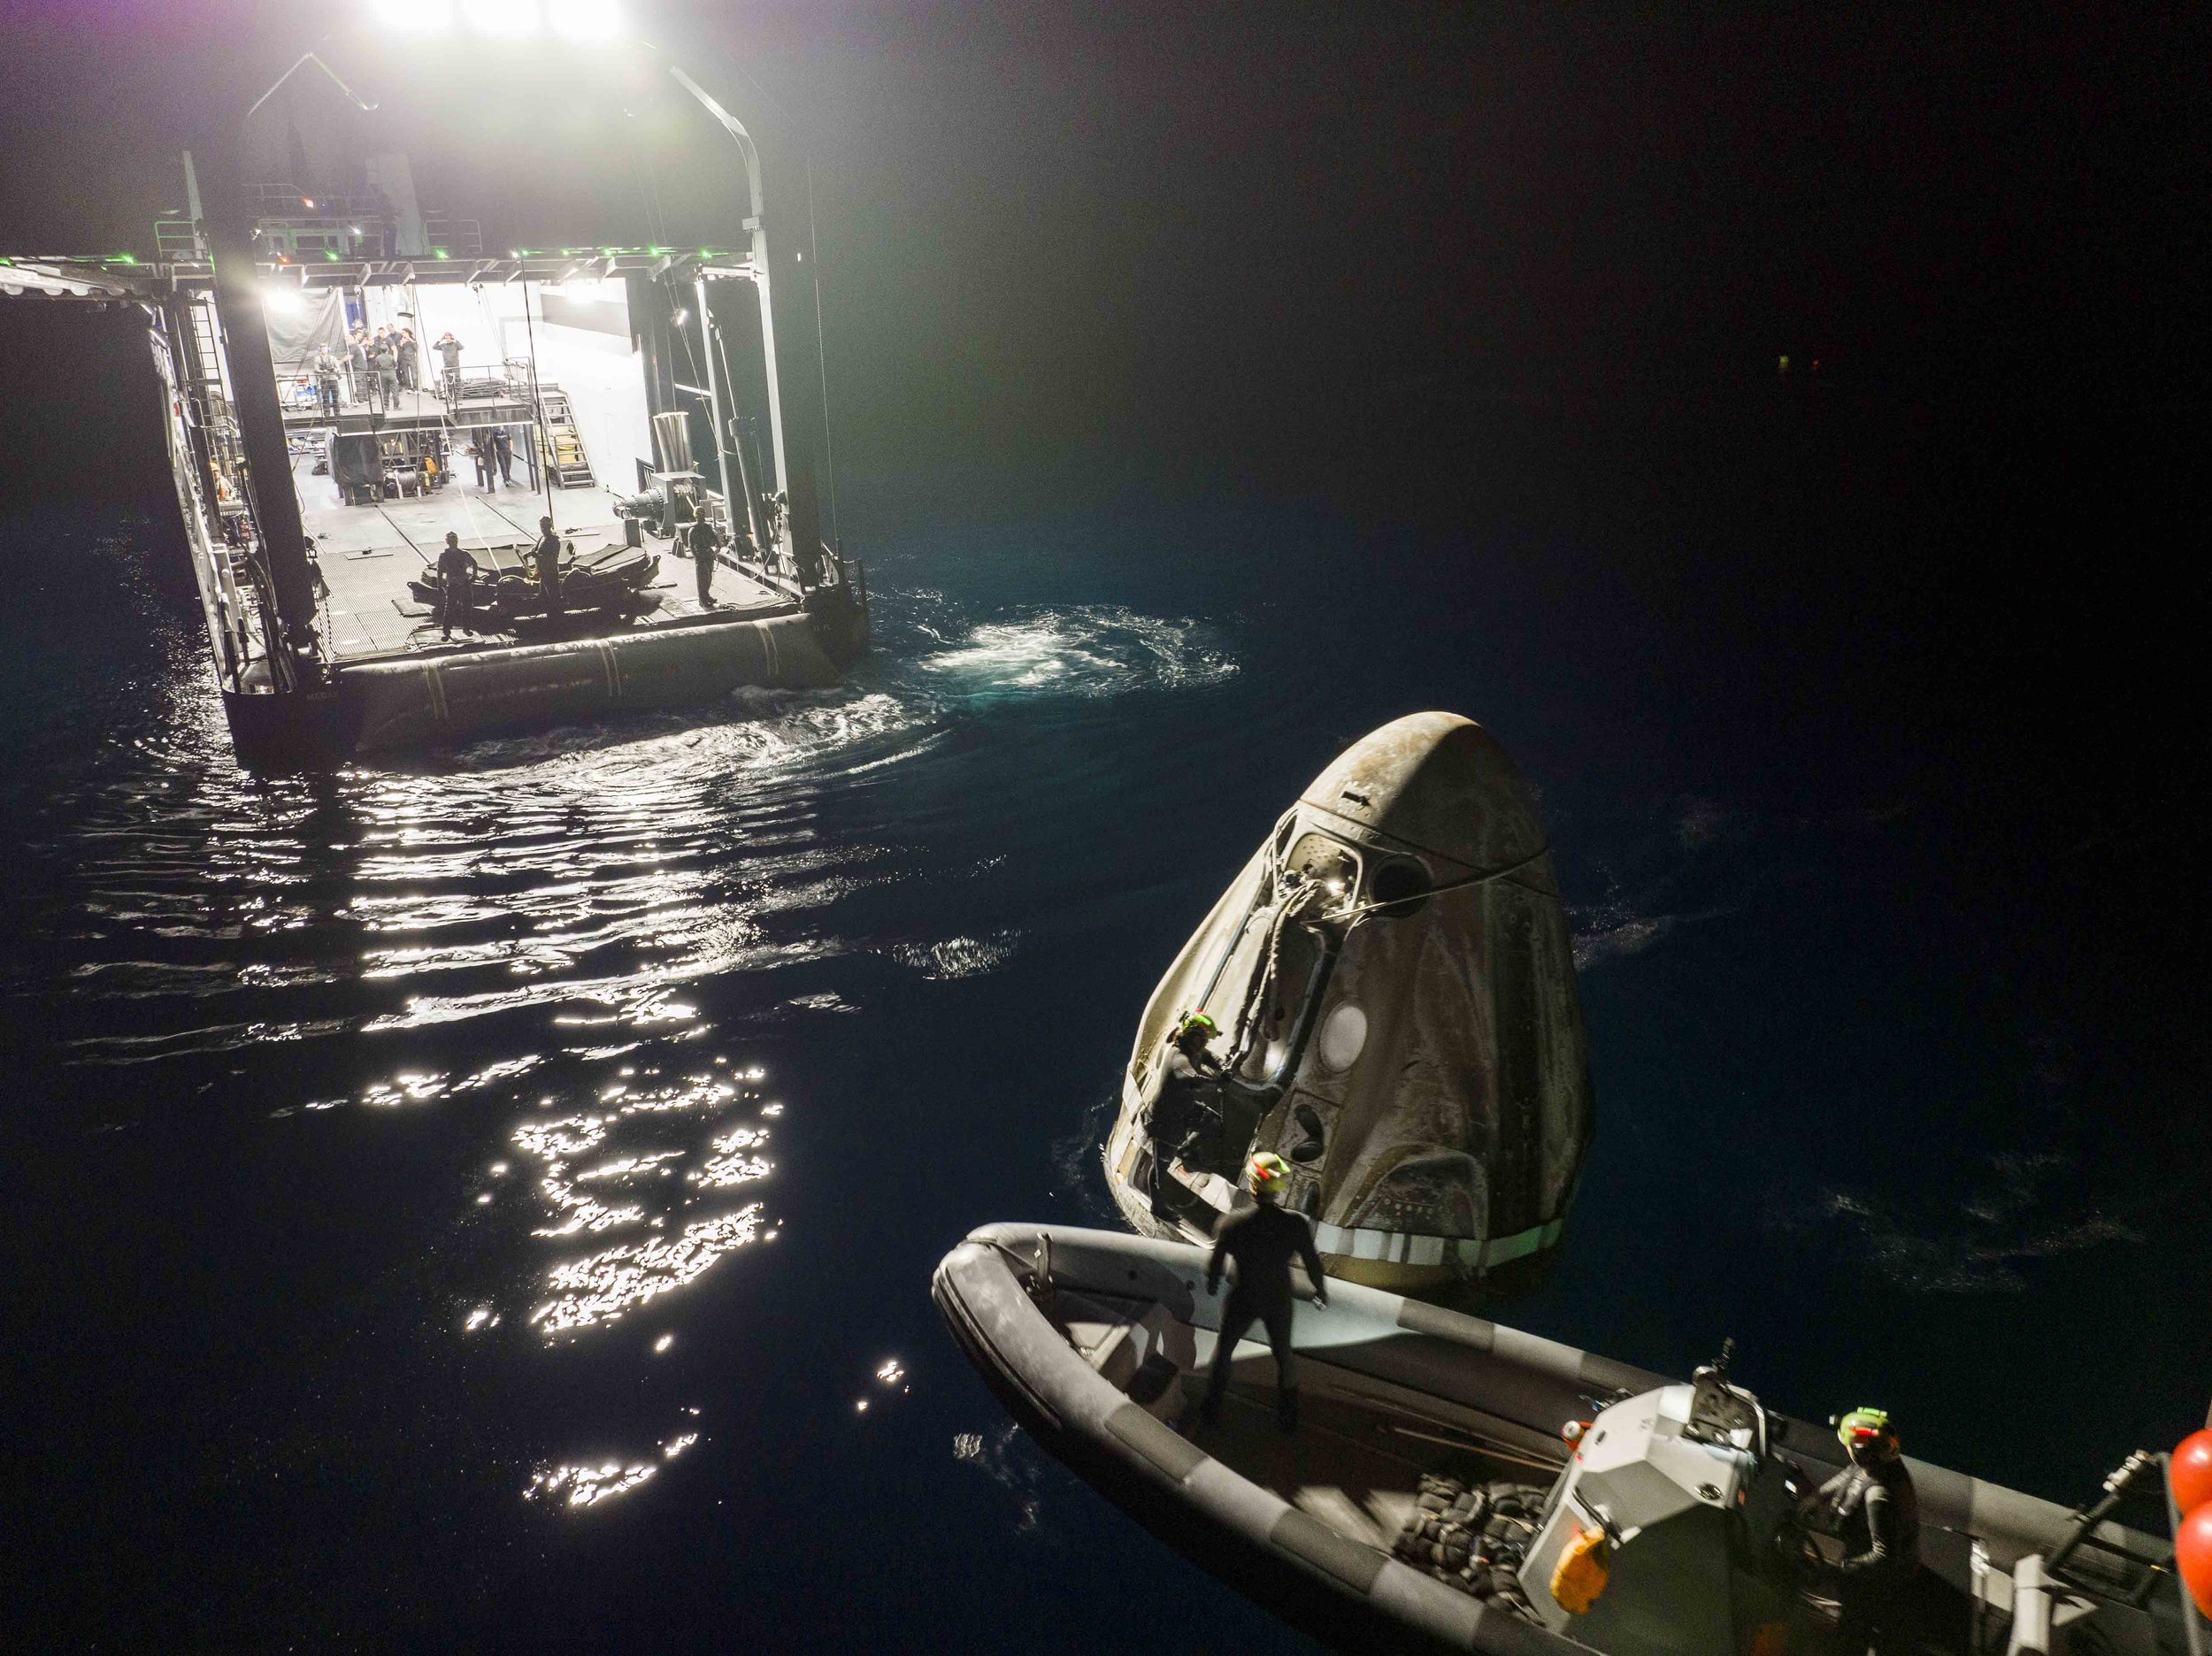 The Axiom-2 crew splashed down successfully (SpaceX)